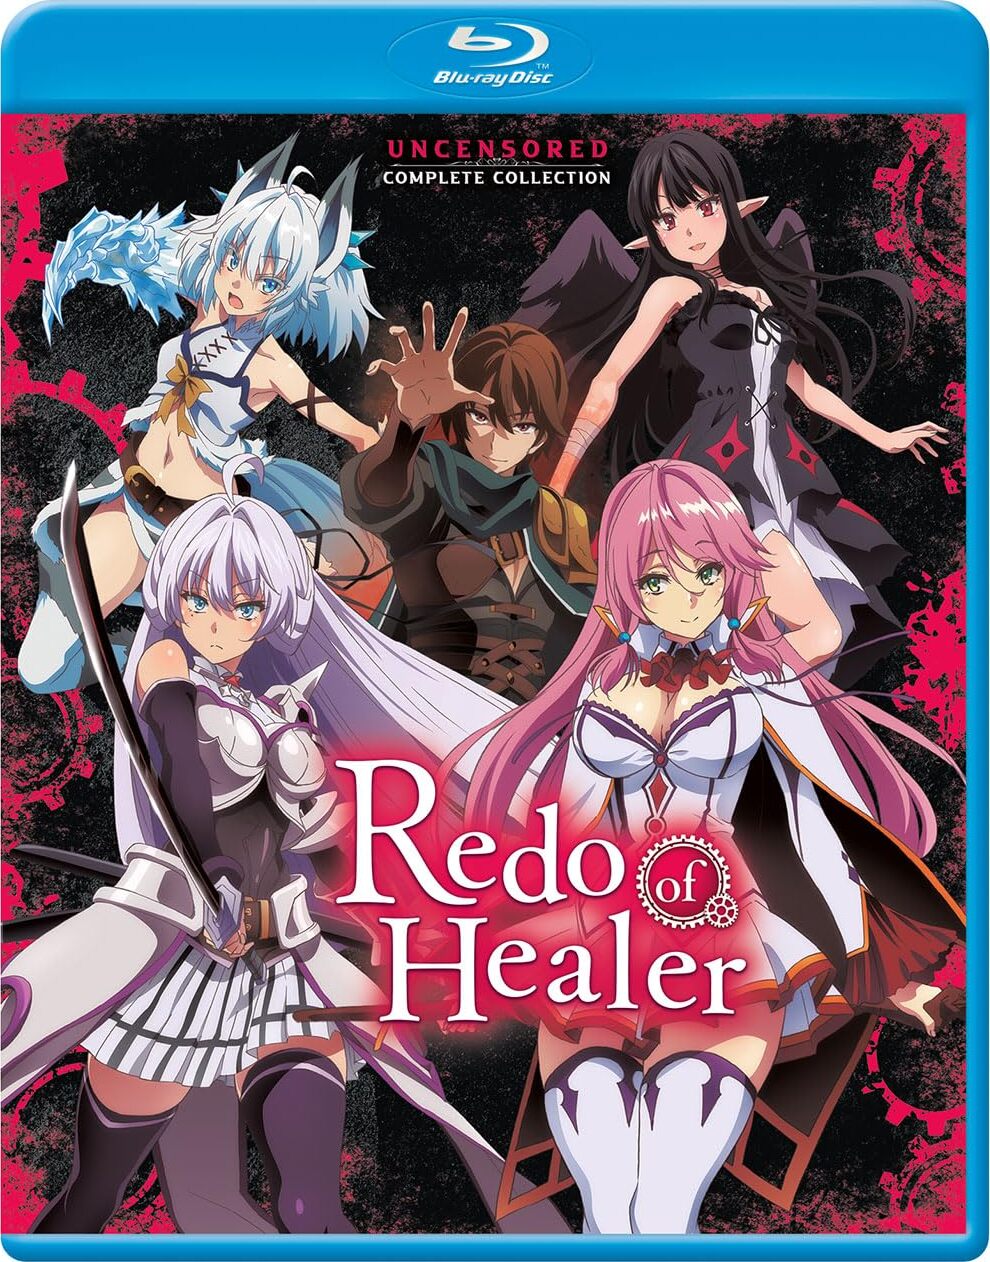 Redo of Healer: Complete Collection Blu-ray (回復術士のやり直し